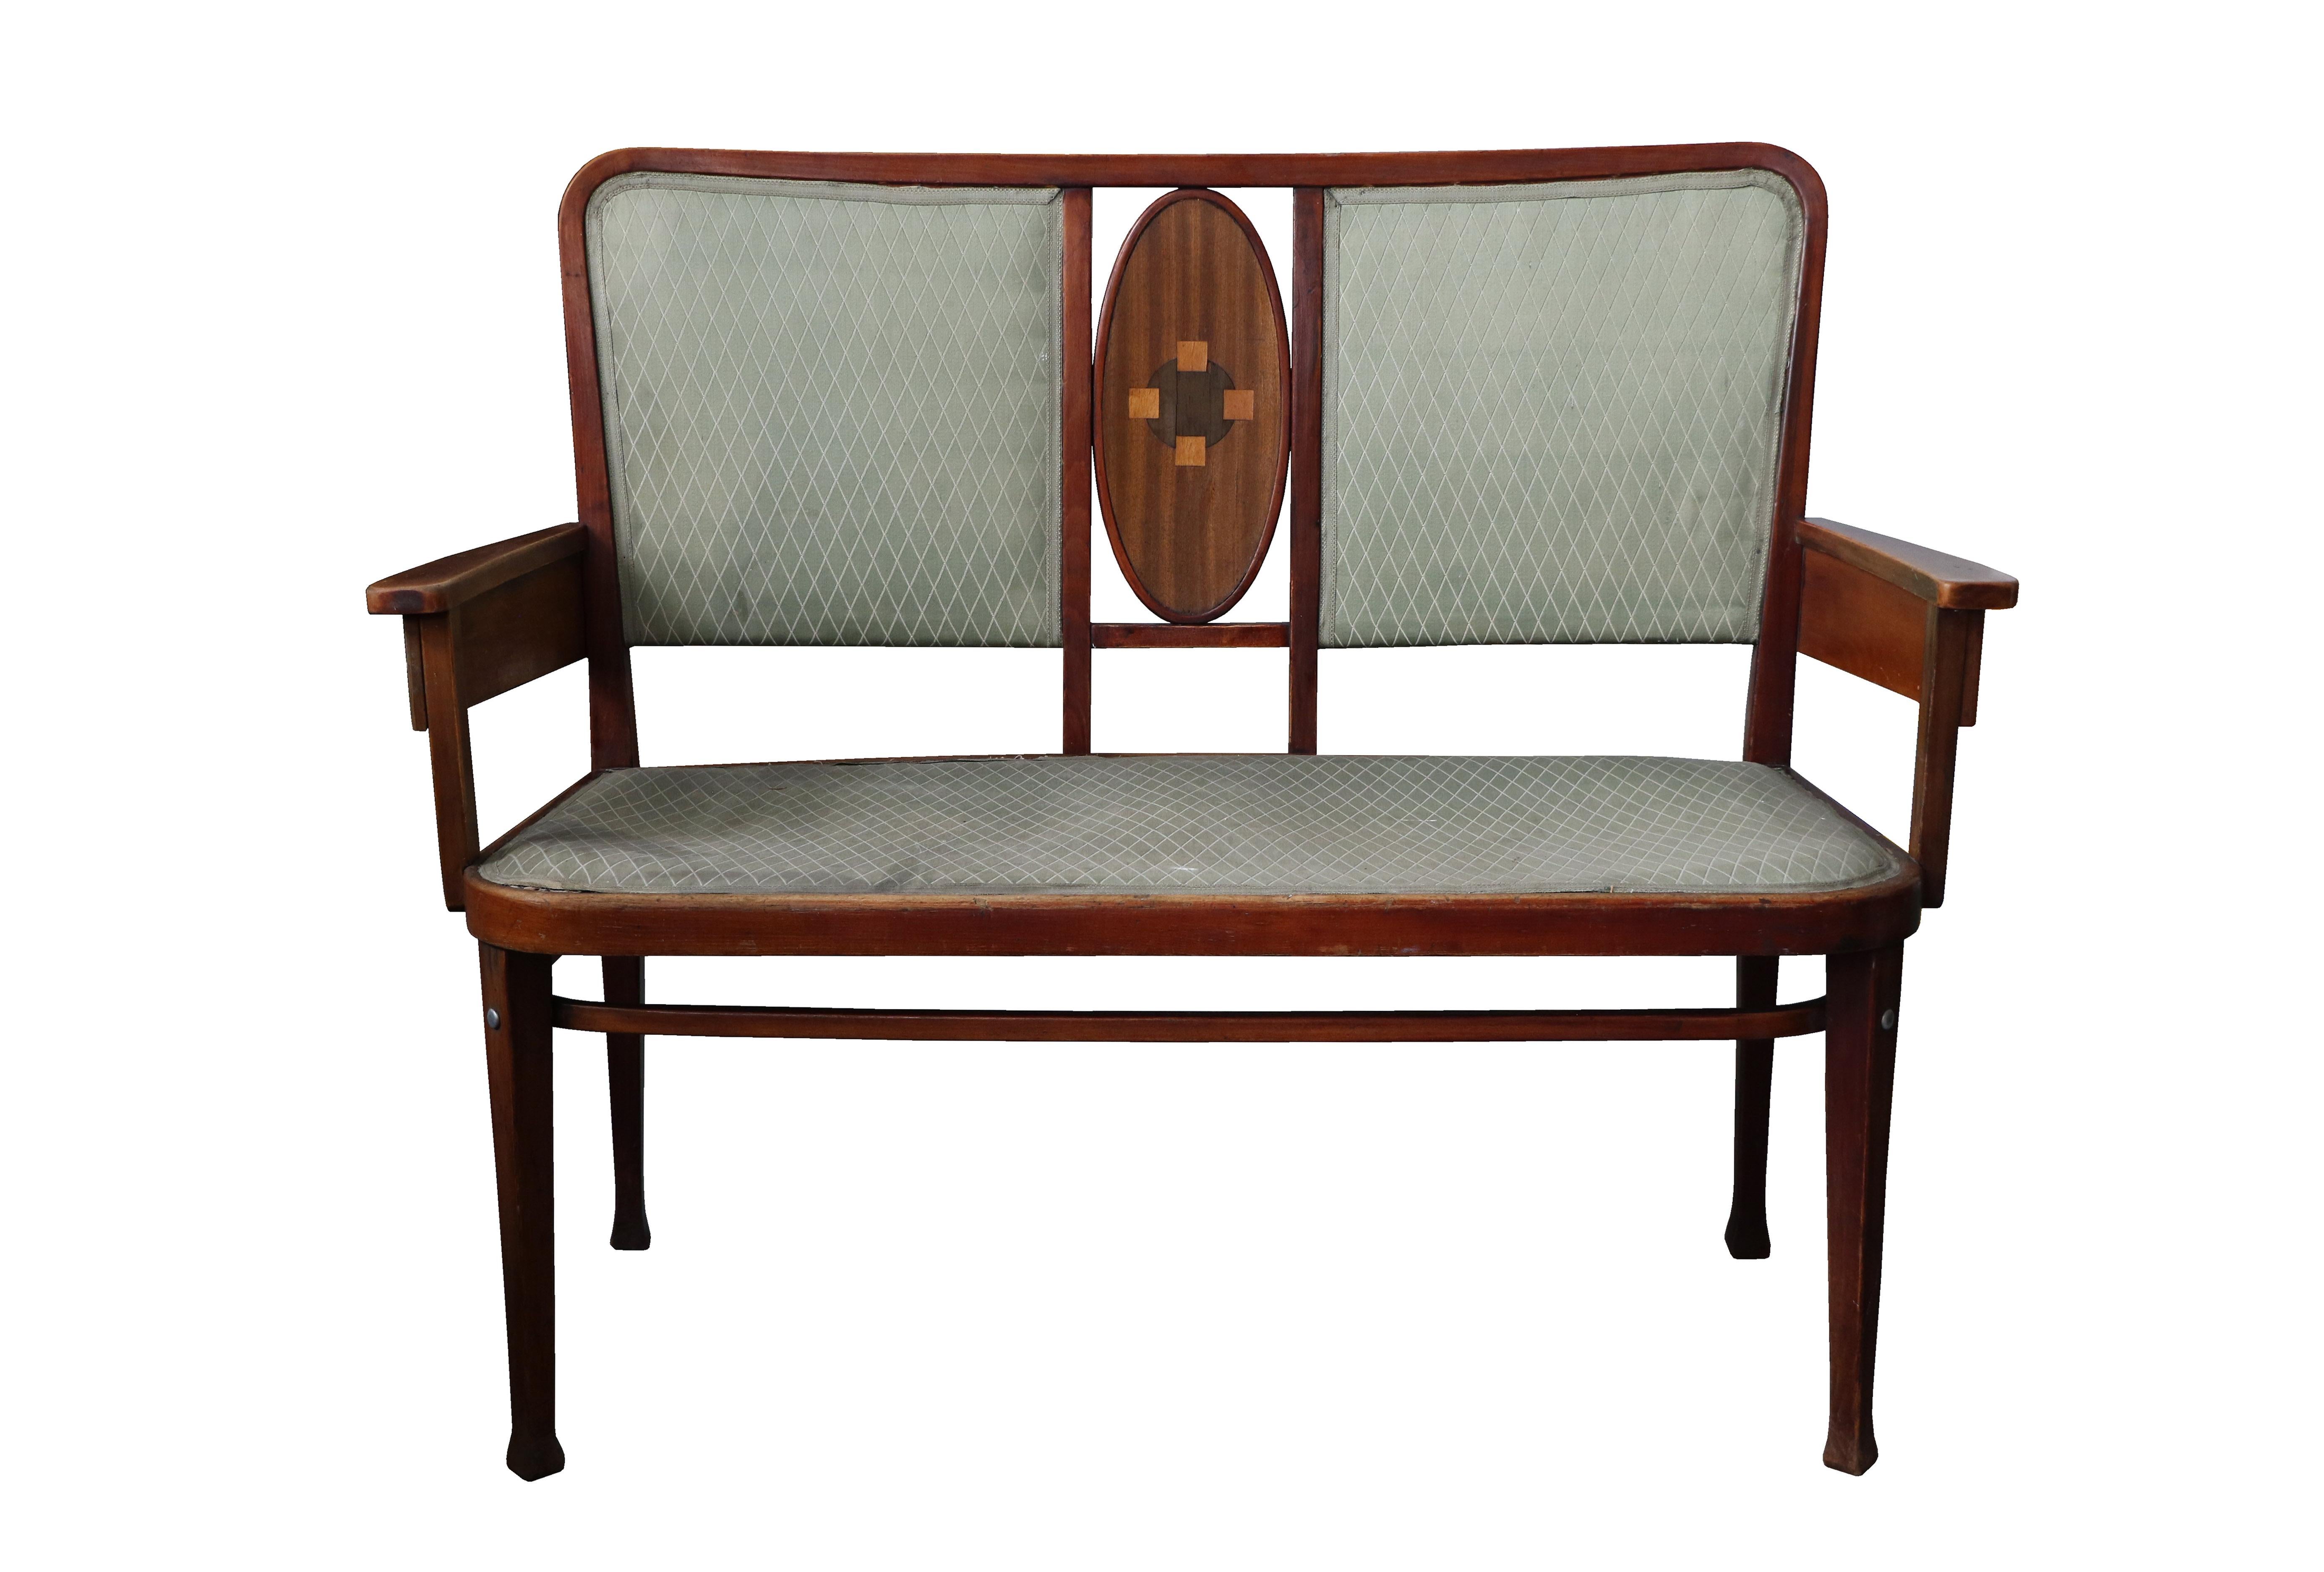 Upholstery 20th Century Fine Set of Thonet Art Nouveau by Marcel Kammerer. Vienna, C. 1910.